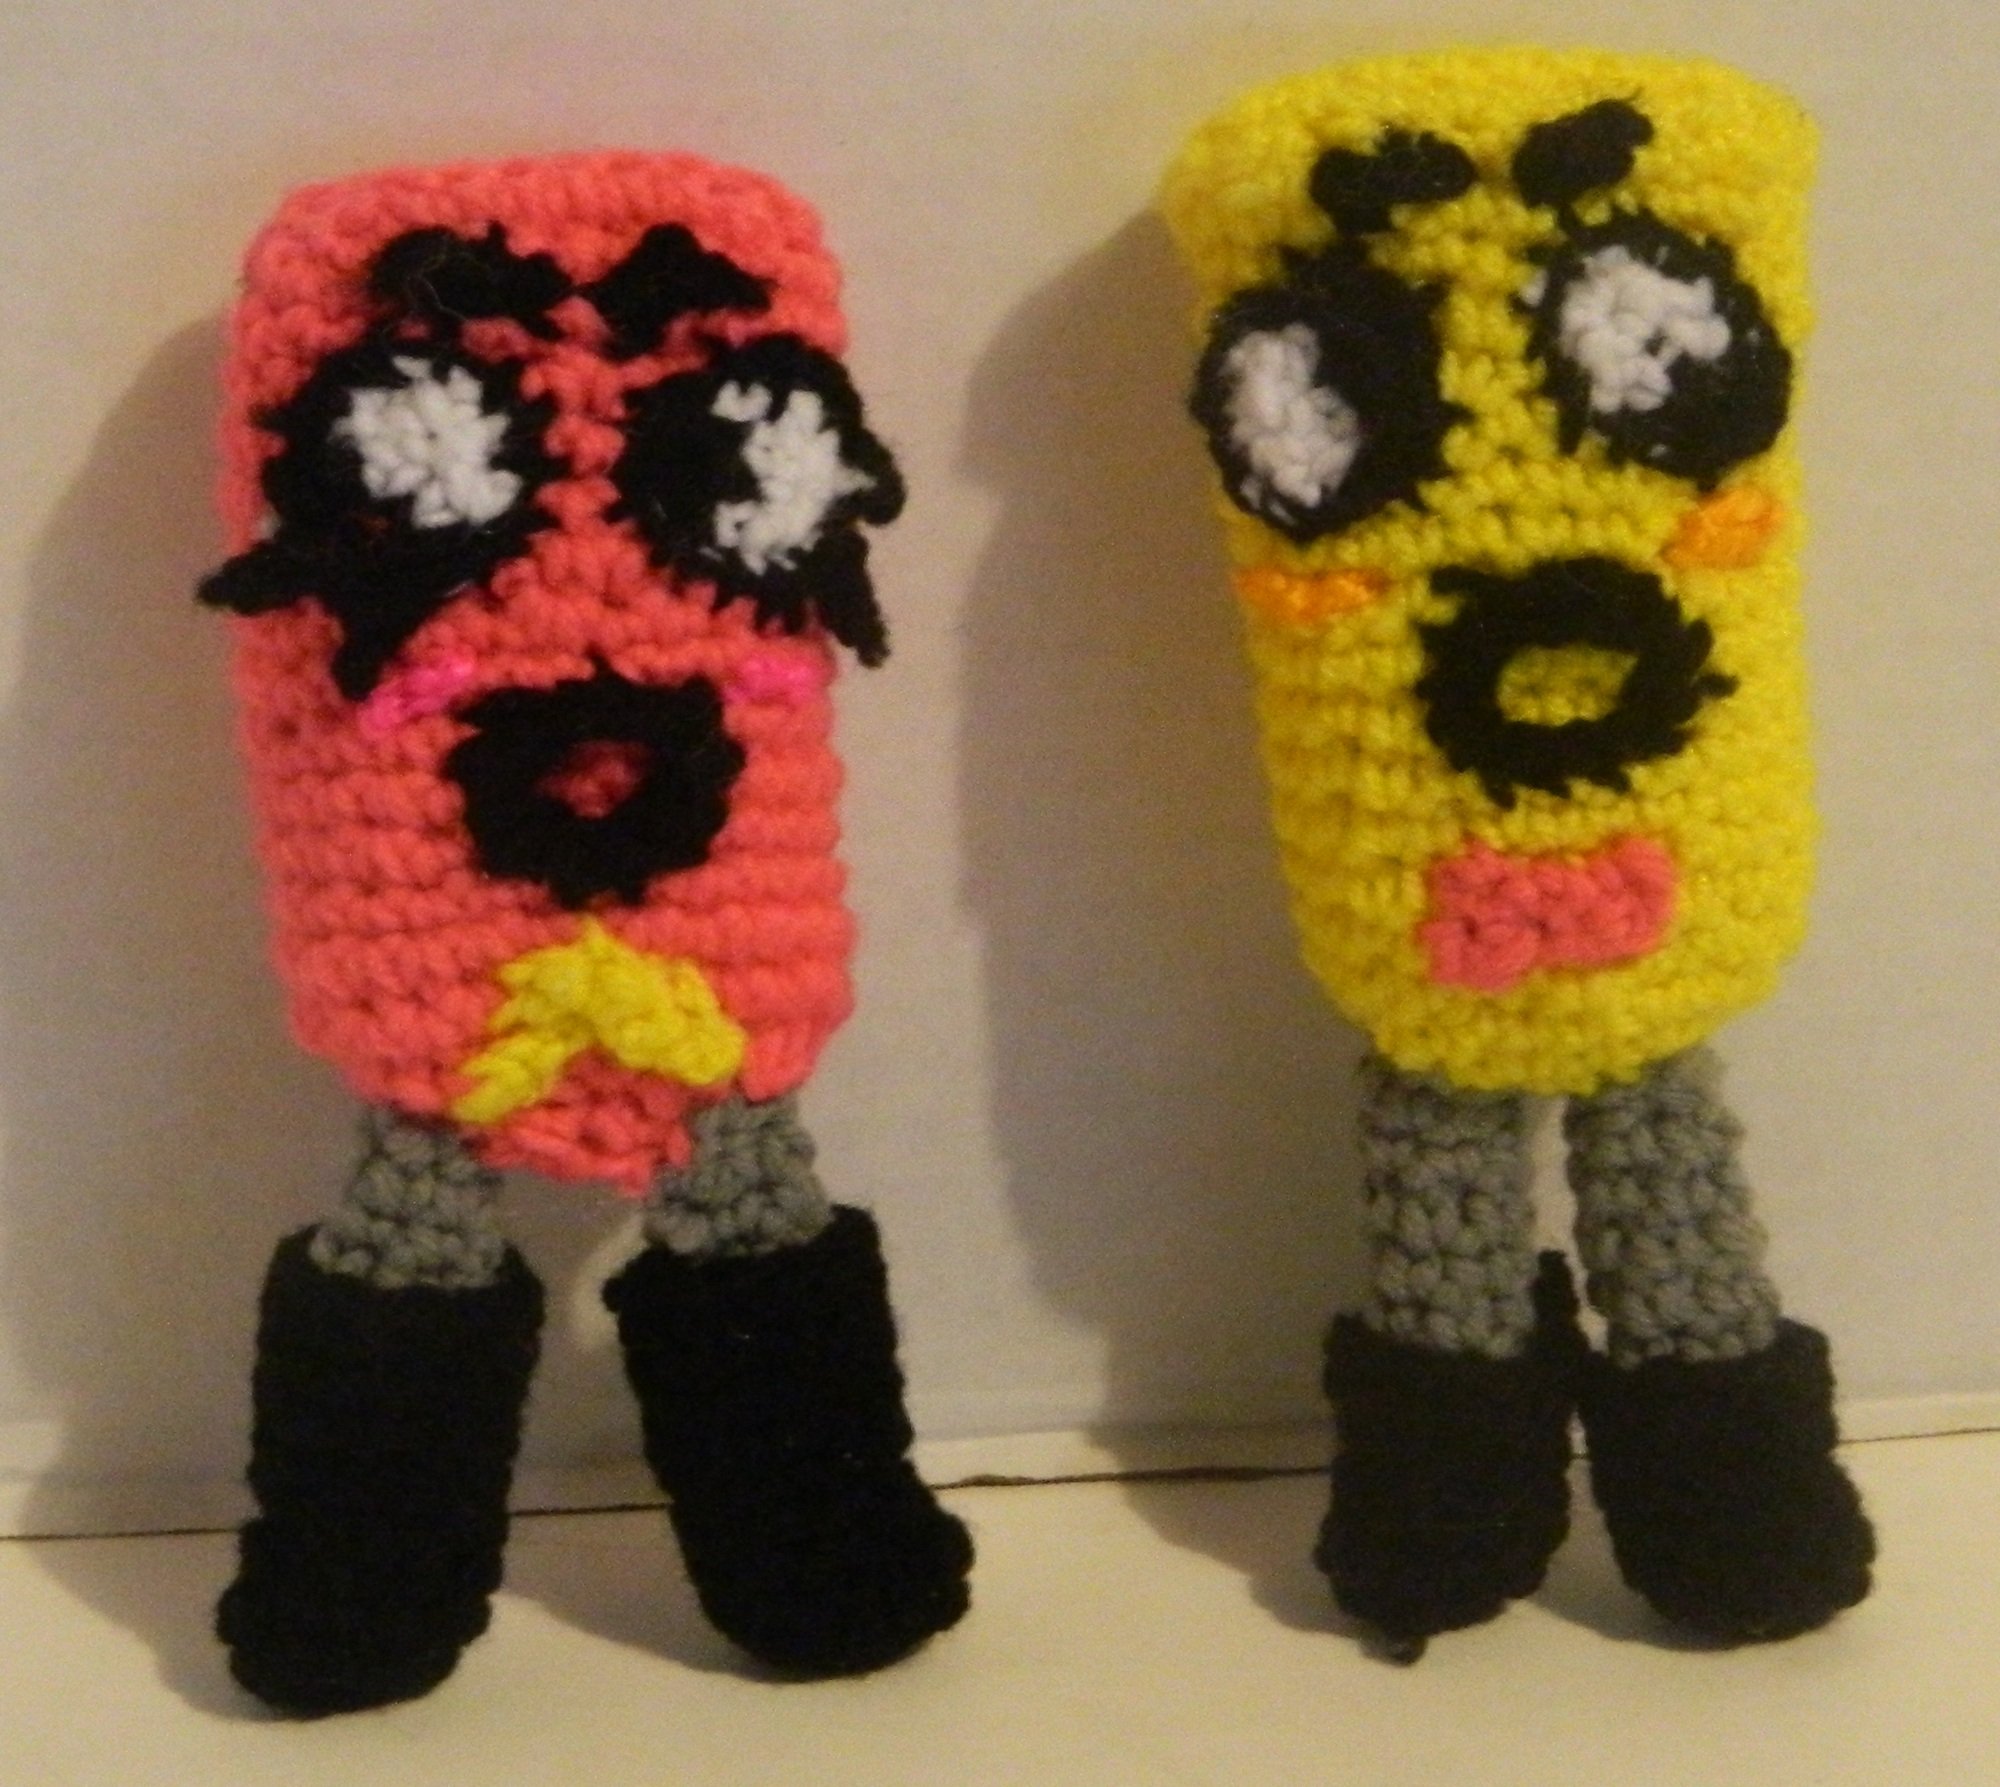 Snip and Clip (Snipperclips) Amigurumi Pattern: Geeky Crochet